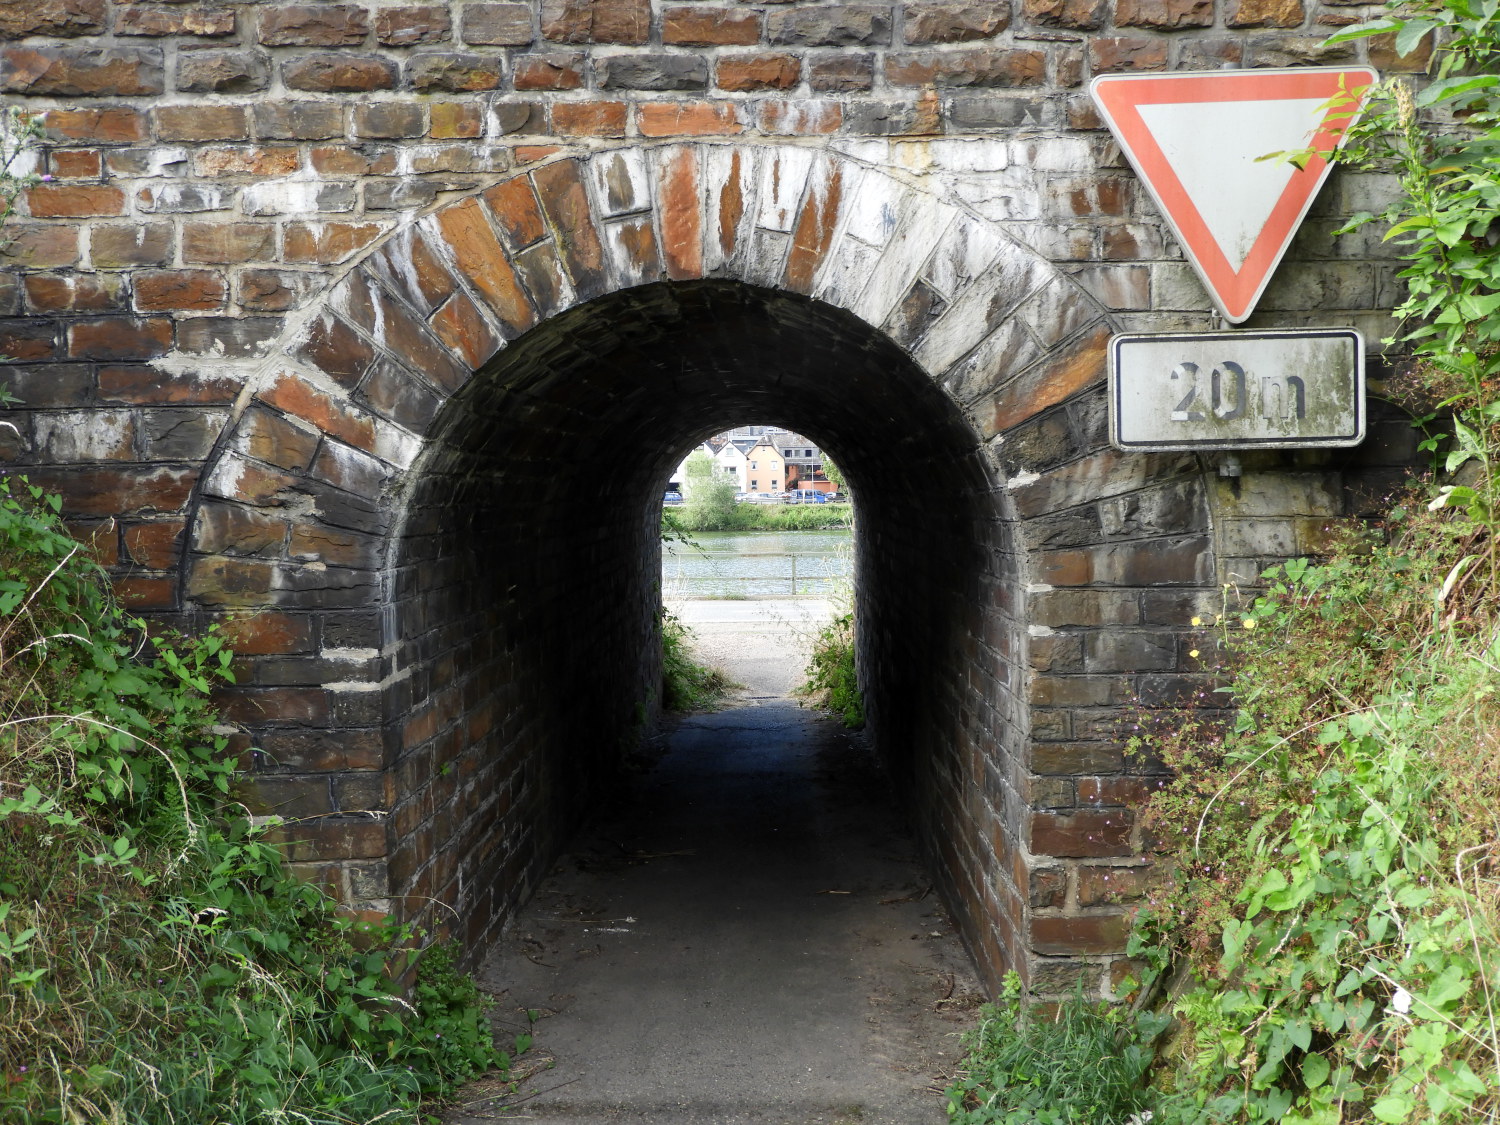 Access tunnel from Moselweinstraße to the river